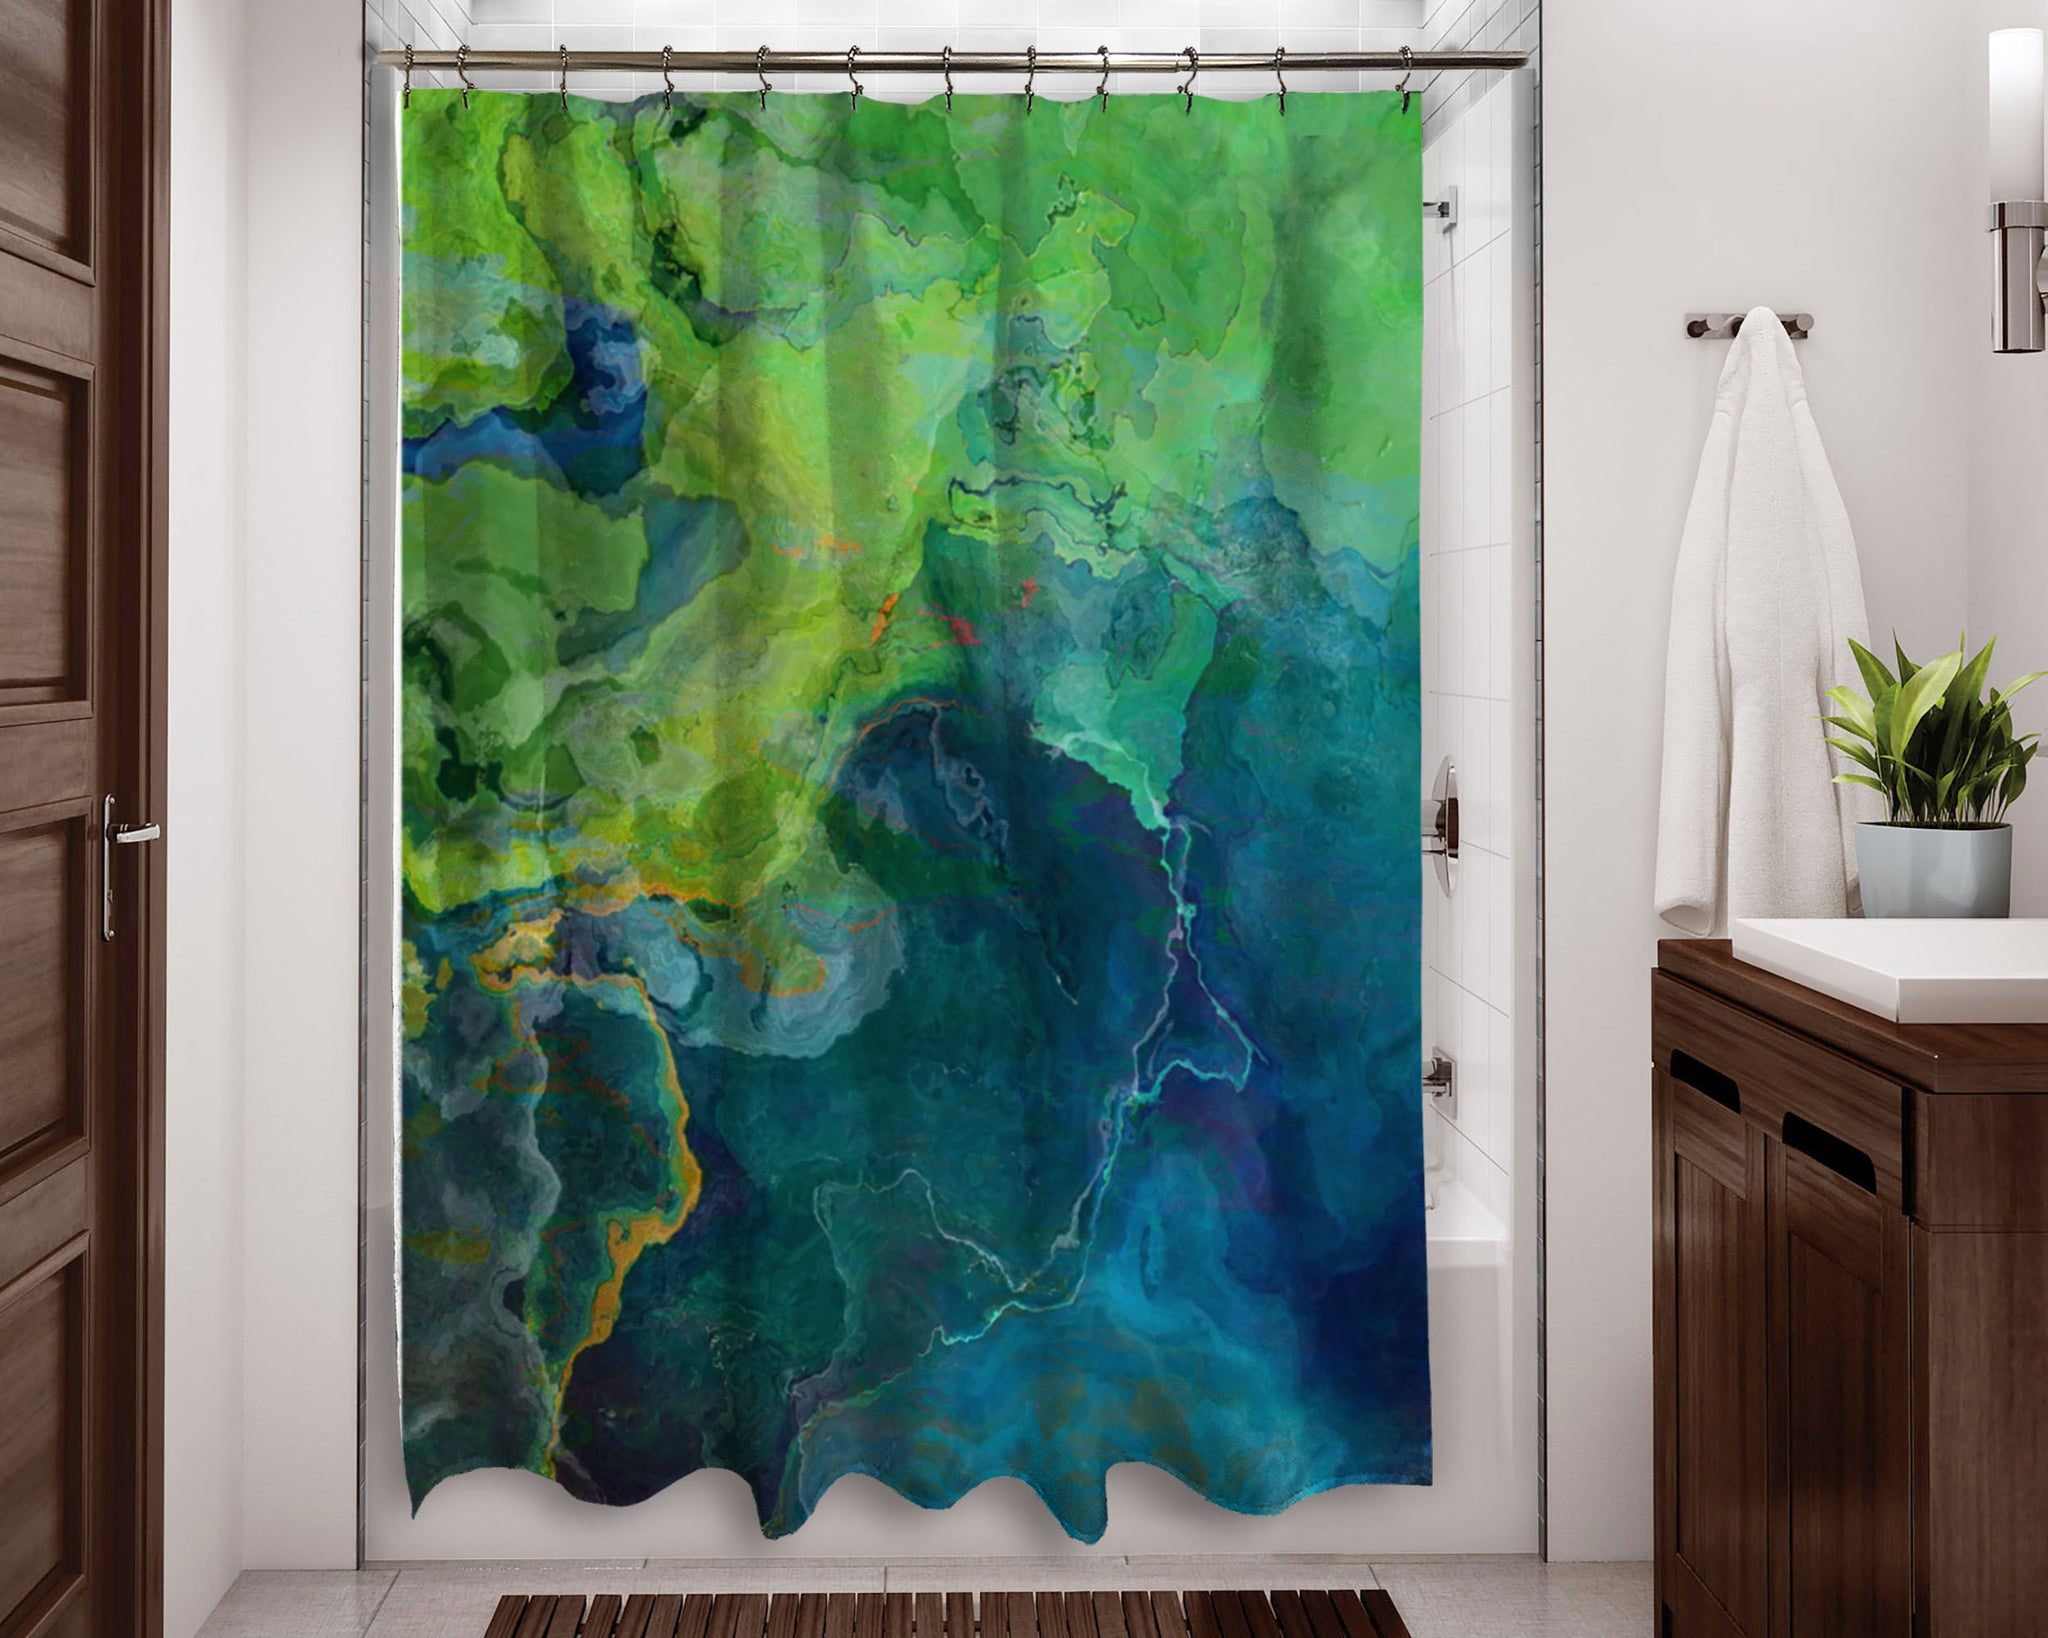 Abstract Shower Curtain Blue And Green Contemporary Bathroom Art Home